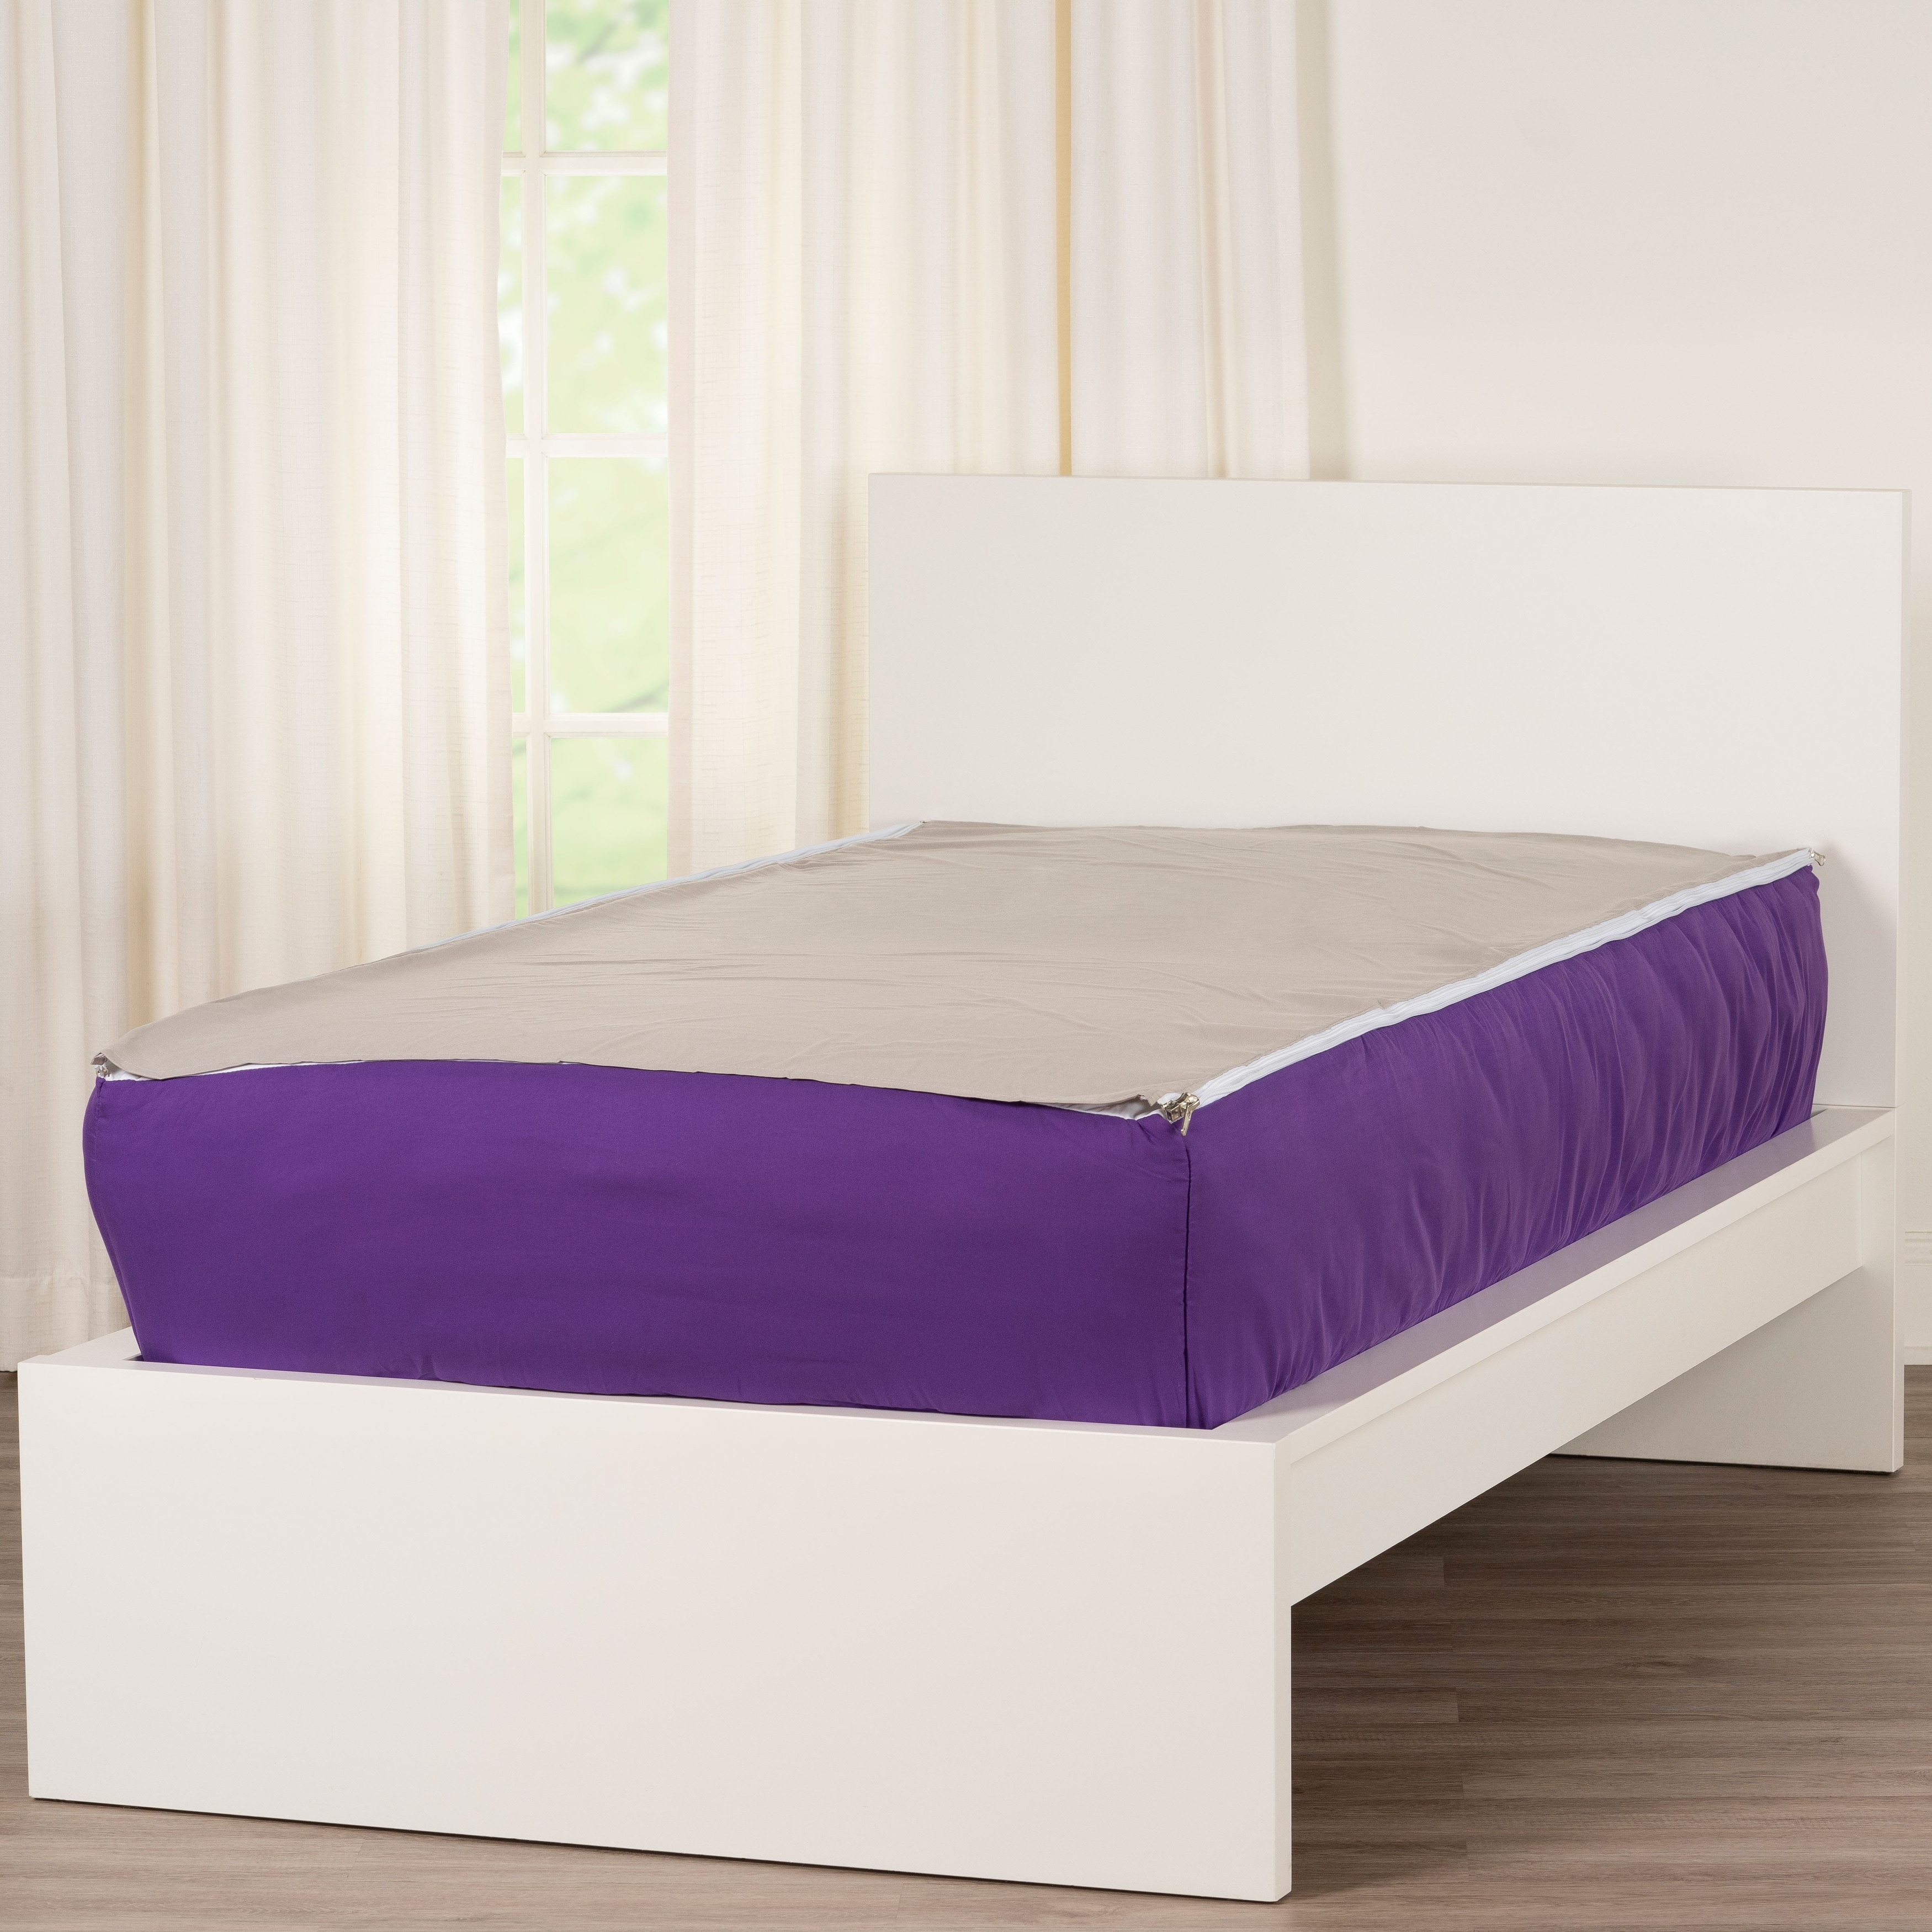 https://ak1.ostkcdn.com/images/products/is/images/direct/641a1629cf54dd19d8682f989d08b295dd494f0f/Siscovers-Purple-Bunkie-Deluxe-Zipper-Bedding-Set.jpg